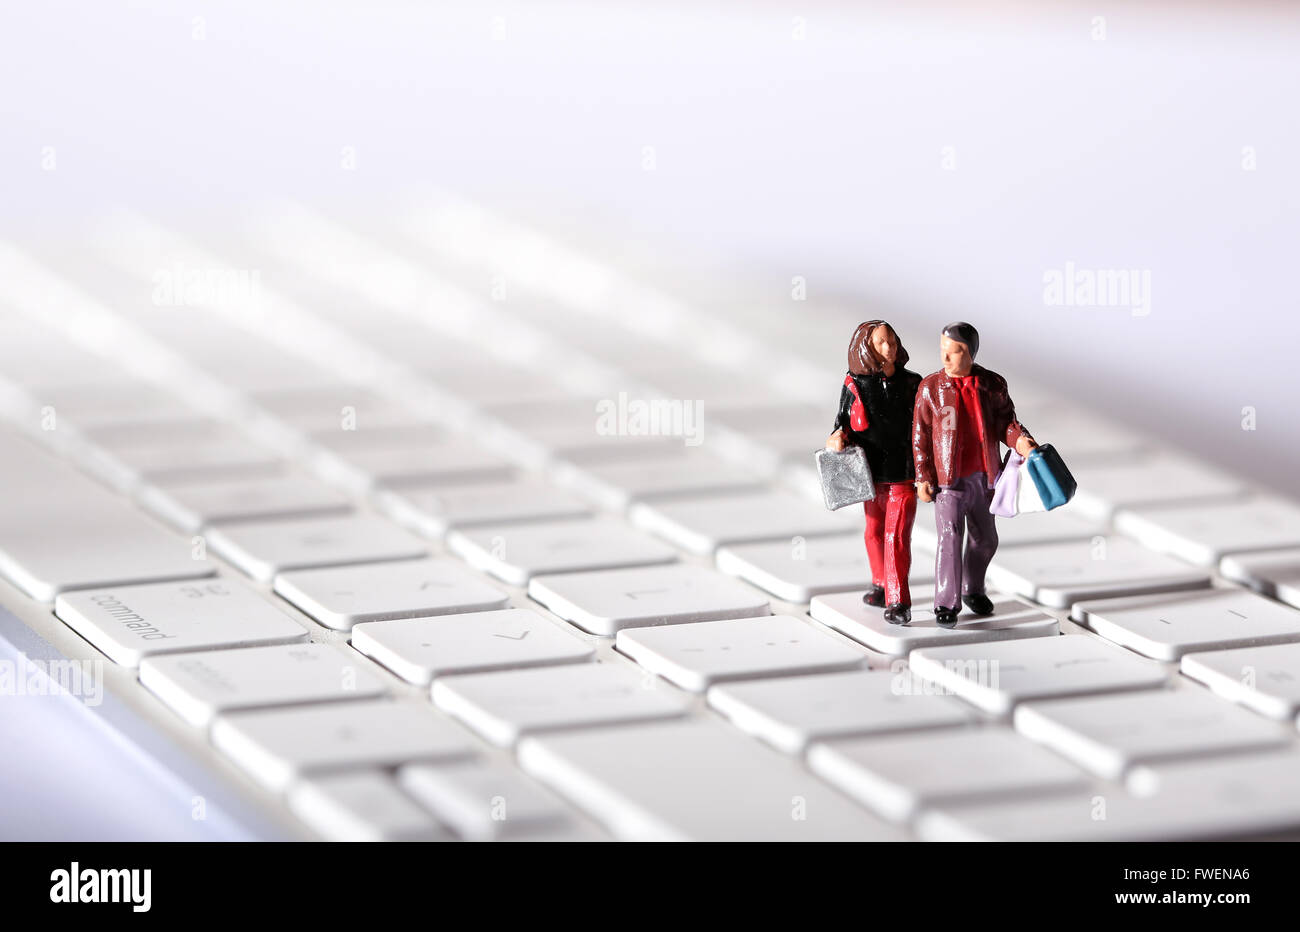 Online Shopping concept image of a couple on a computer keyboard carrying shopping bags Stock Photo